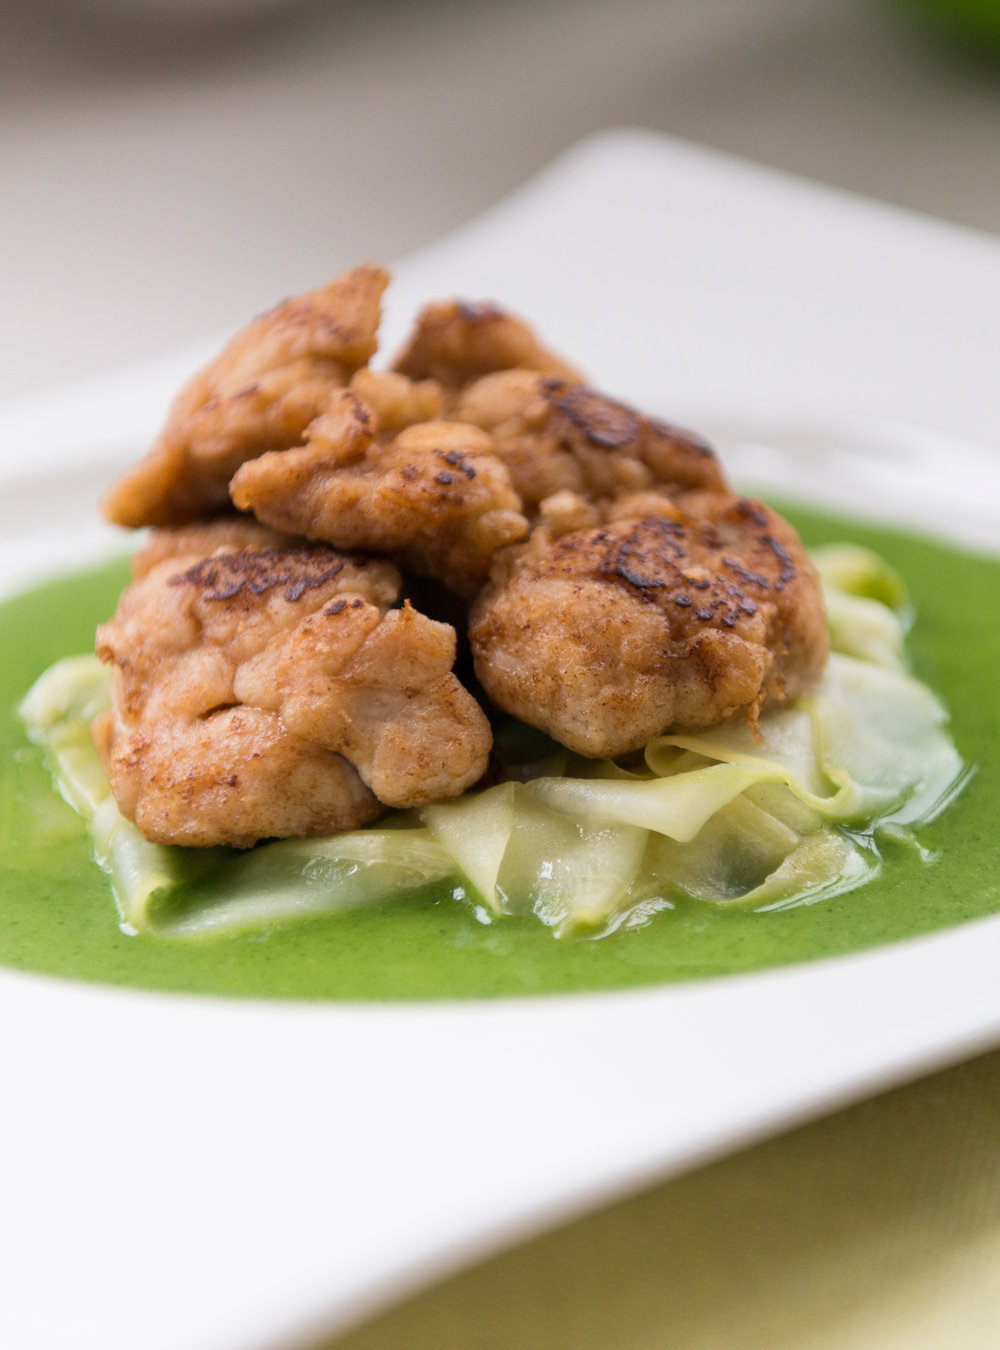 Stelio Perombelon’s Seared Sweetbread with Warm Cucumber and Parsley Butter